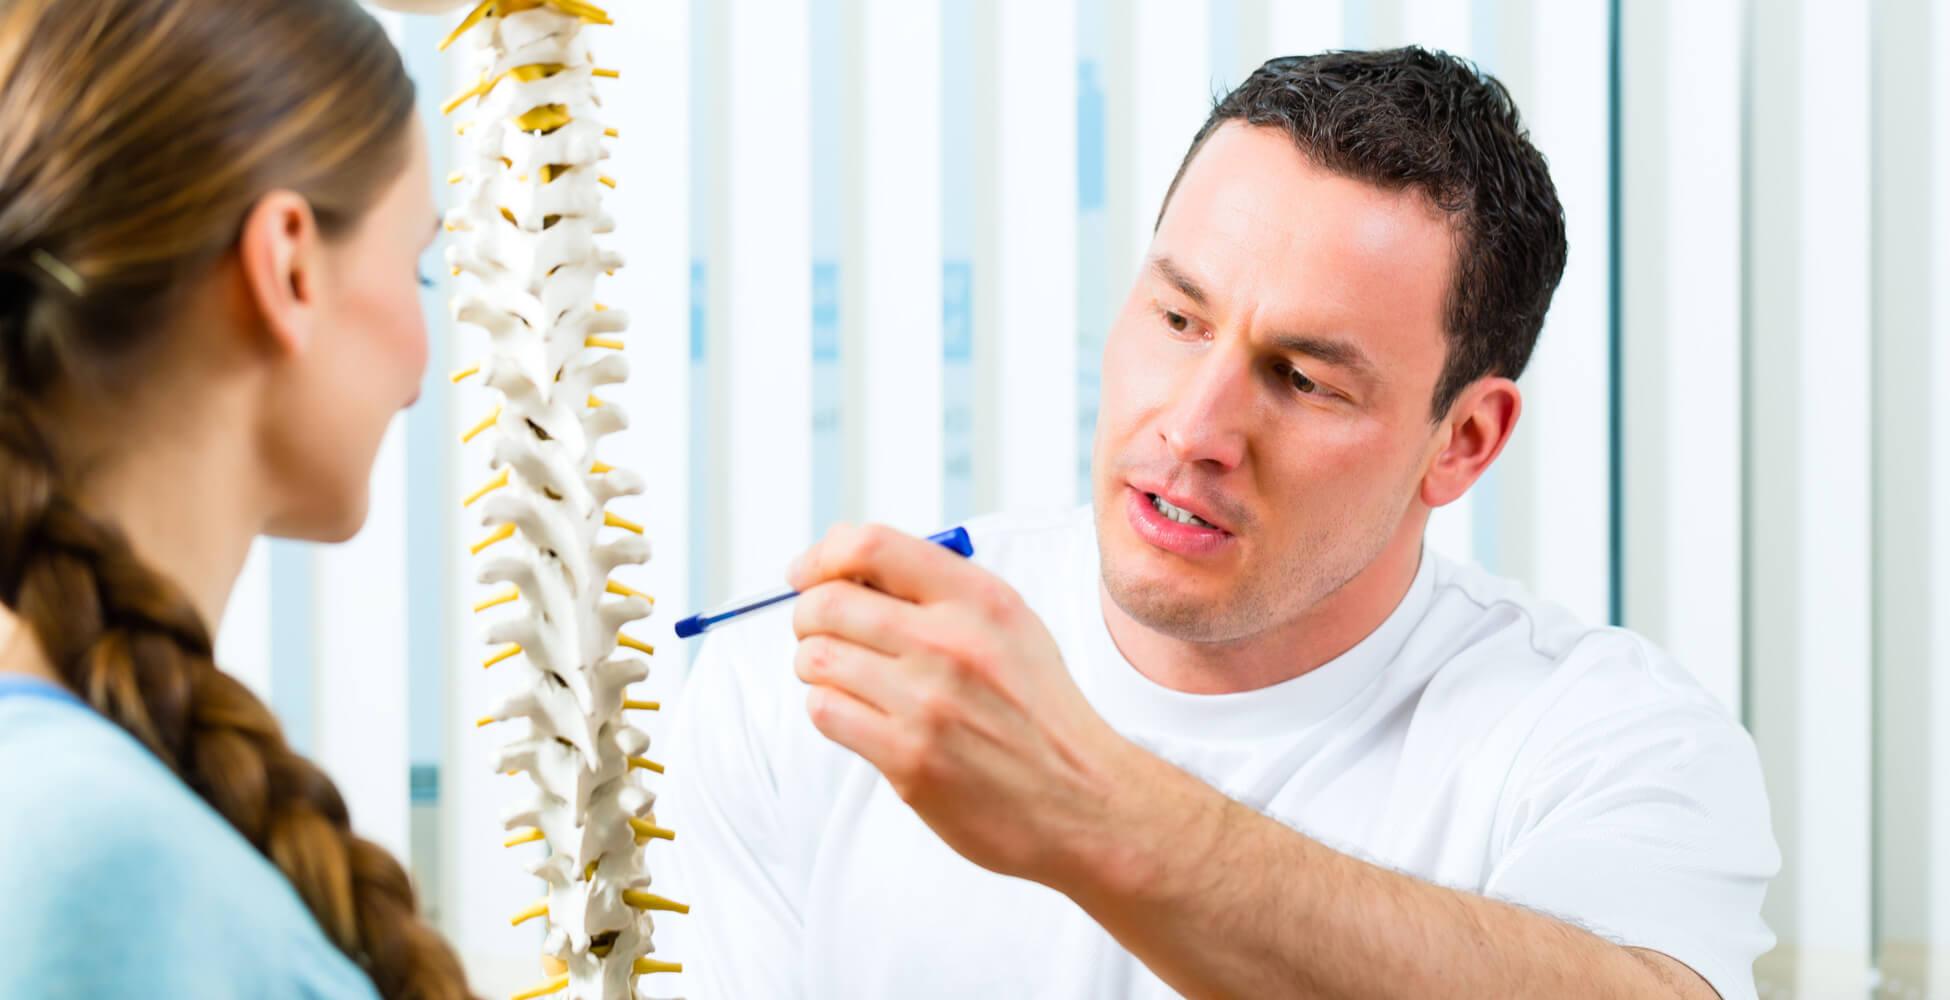 Chiropractor Wallpaper High Quality